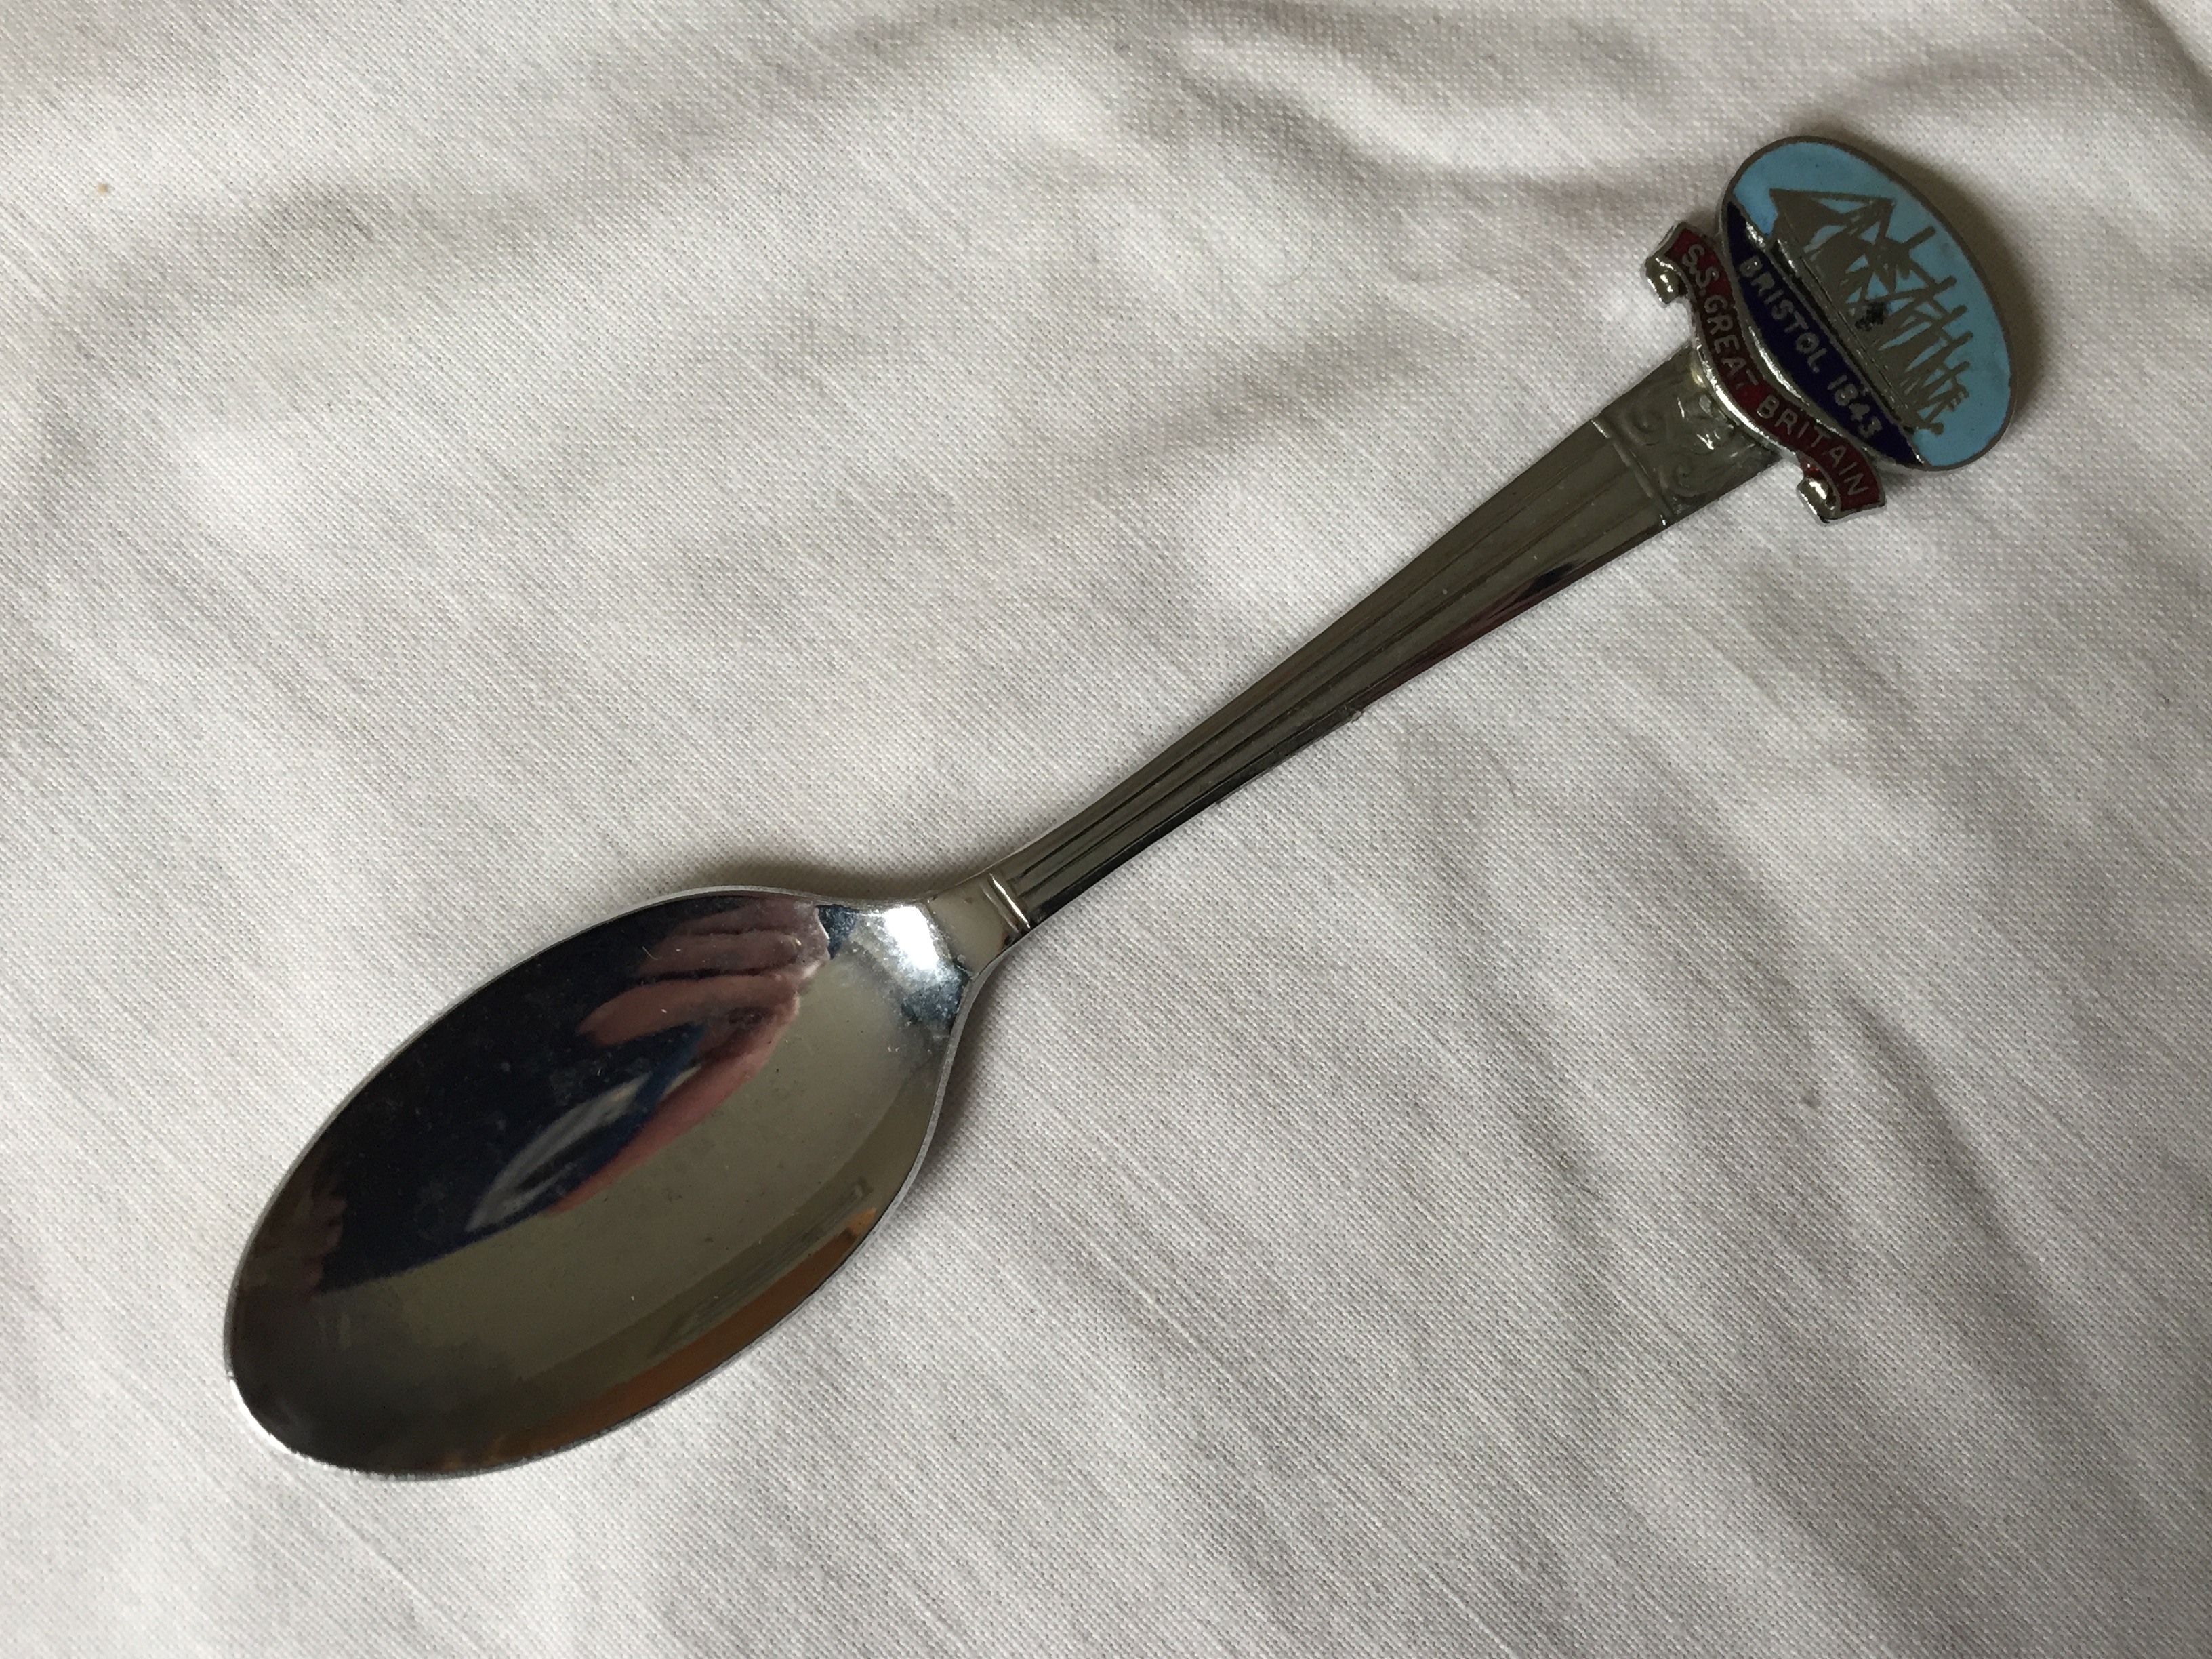 SOUVENIR SPOON FROM THE FAMOUS VESSEL THE SS GREAT BRITAIN